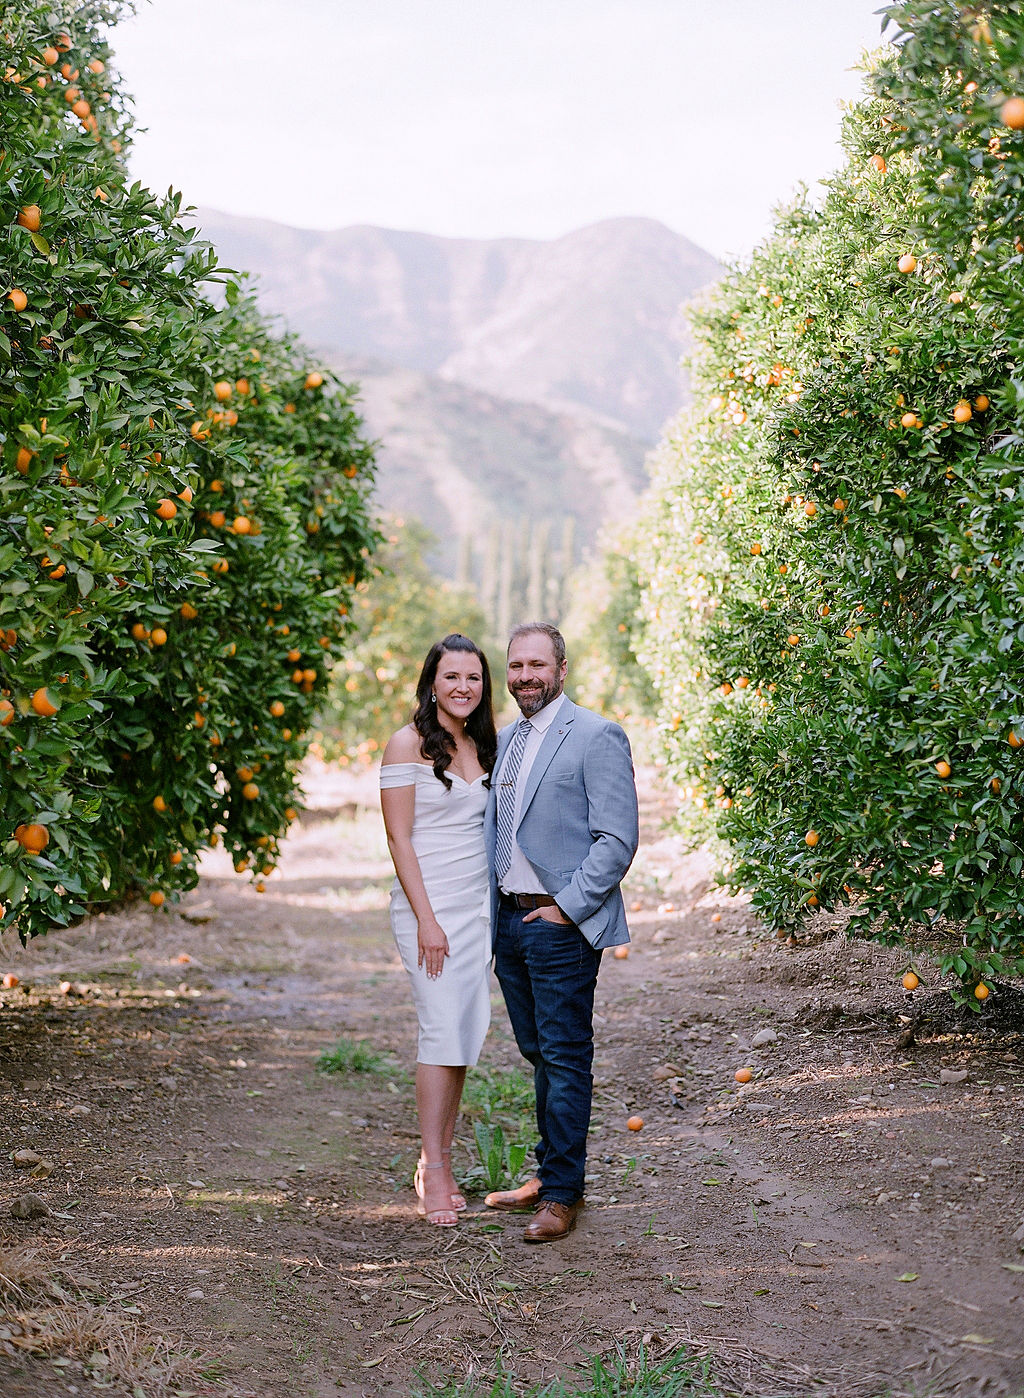 The Orchard in Ojai